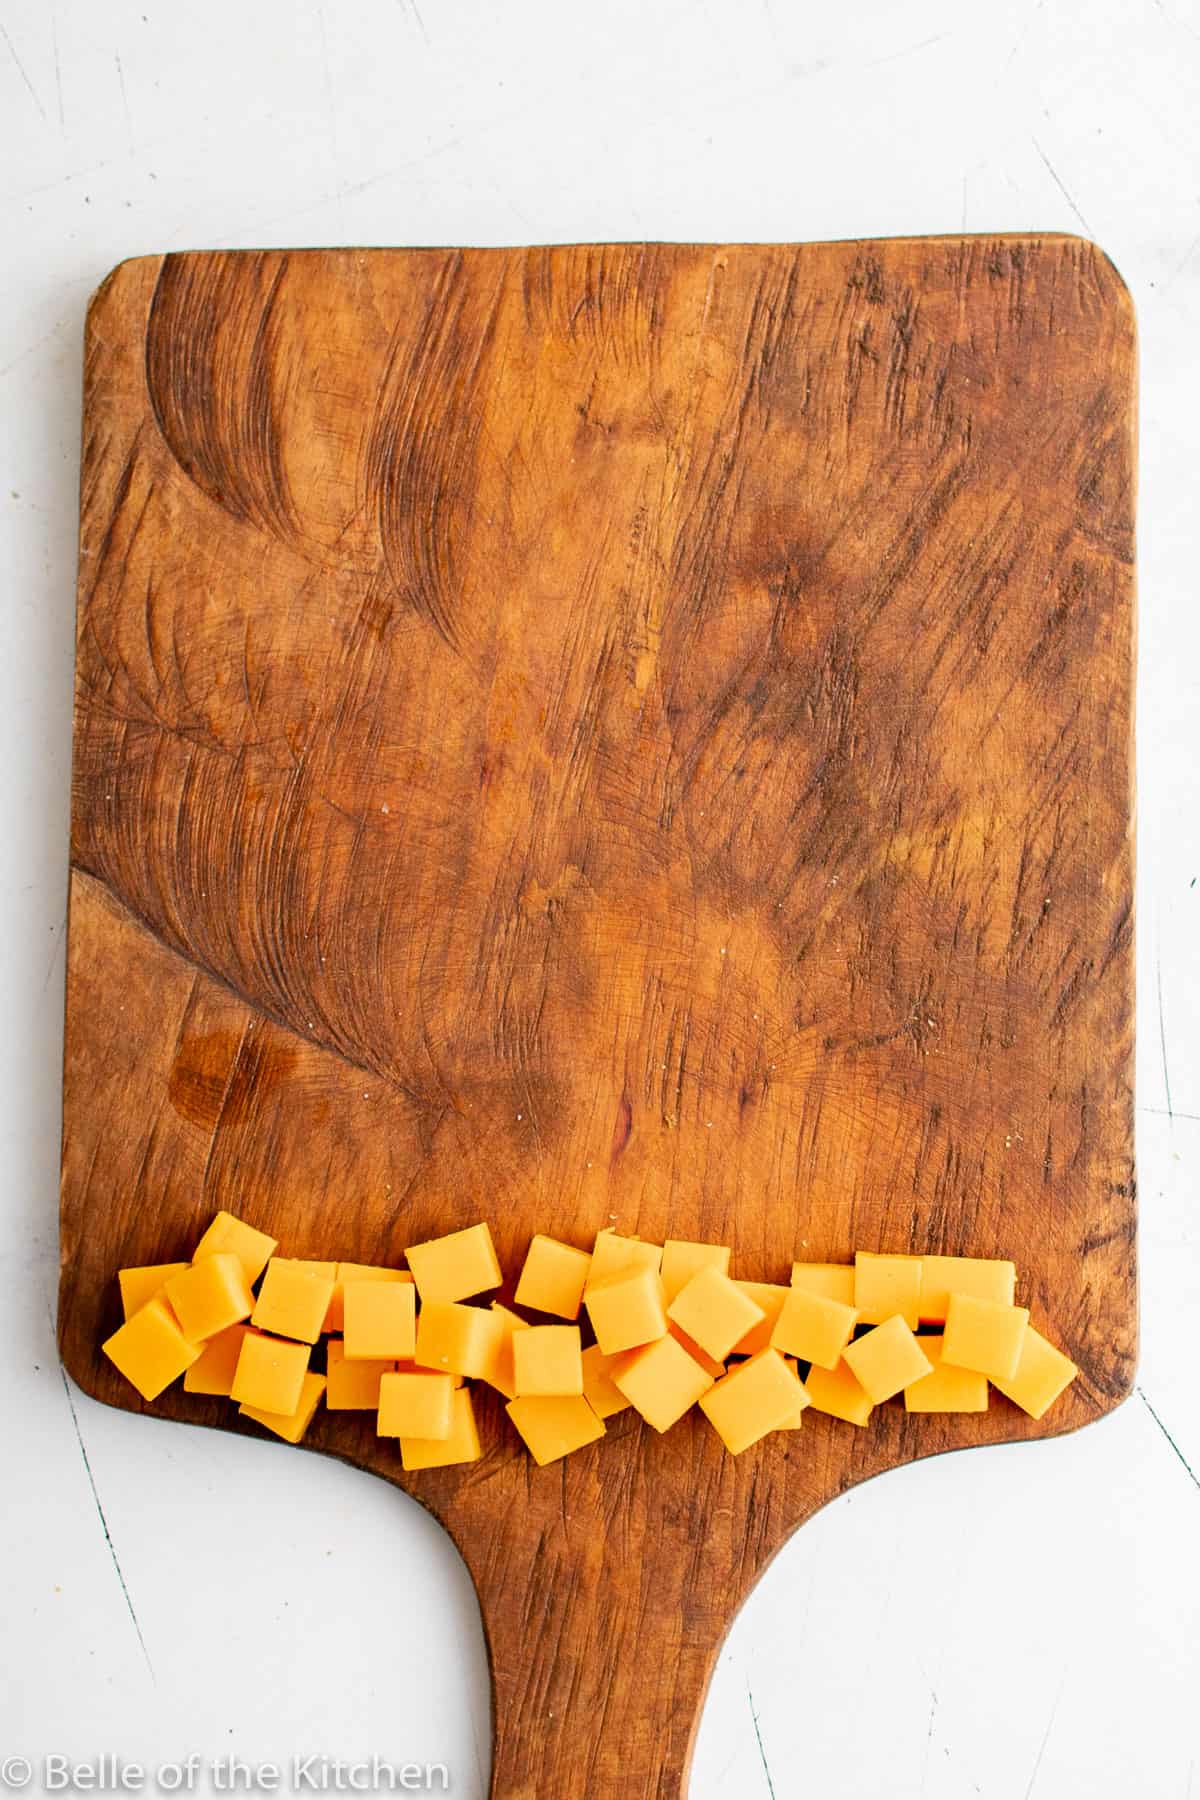 cut up cheese cubes on a wooden cutting board.